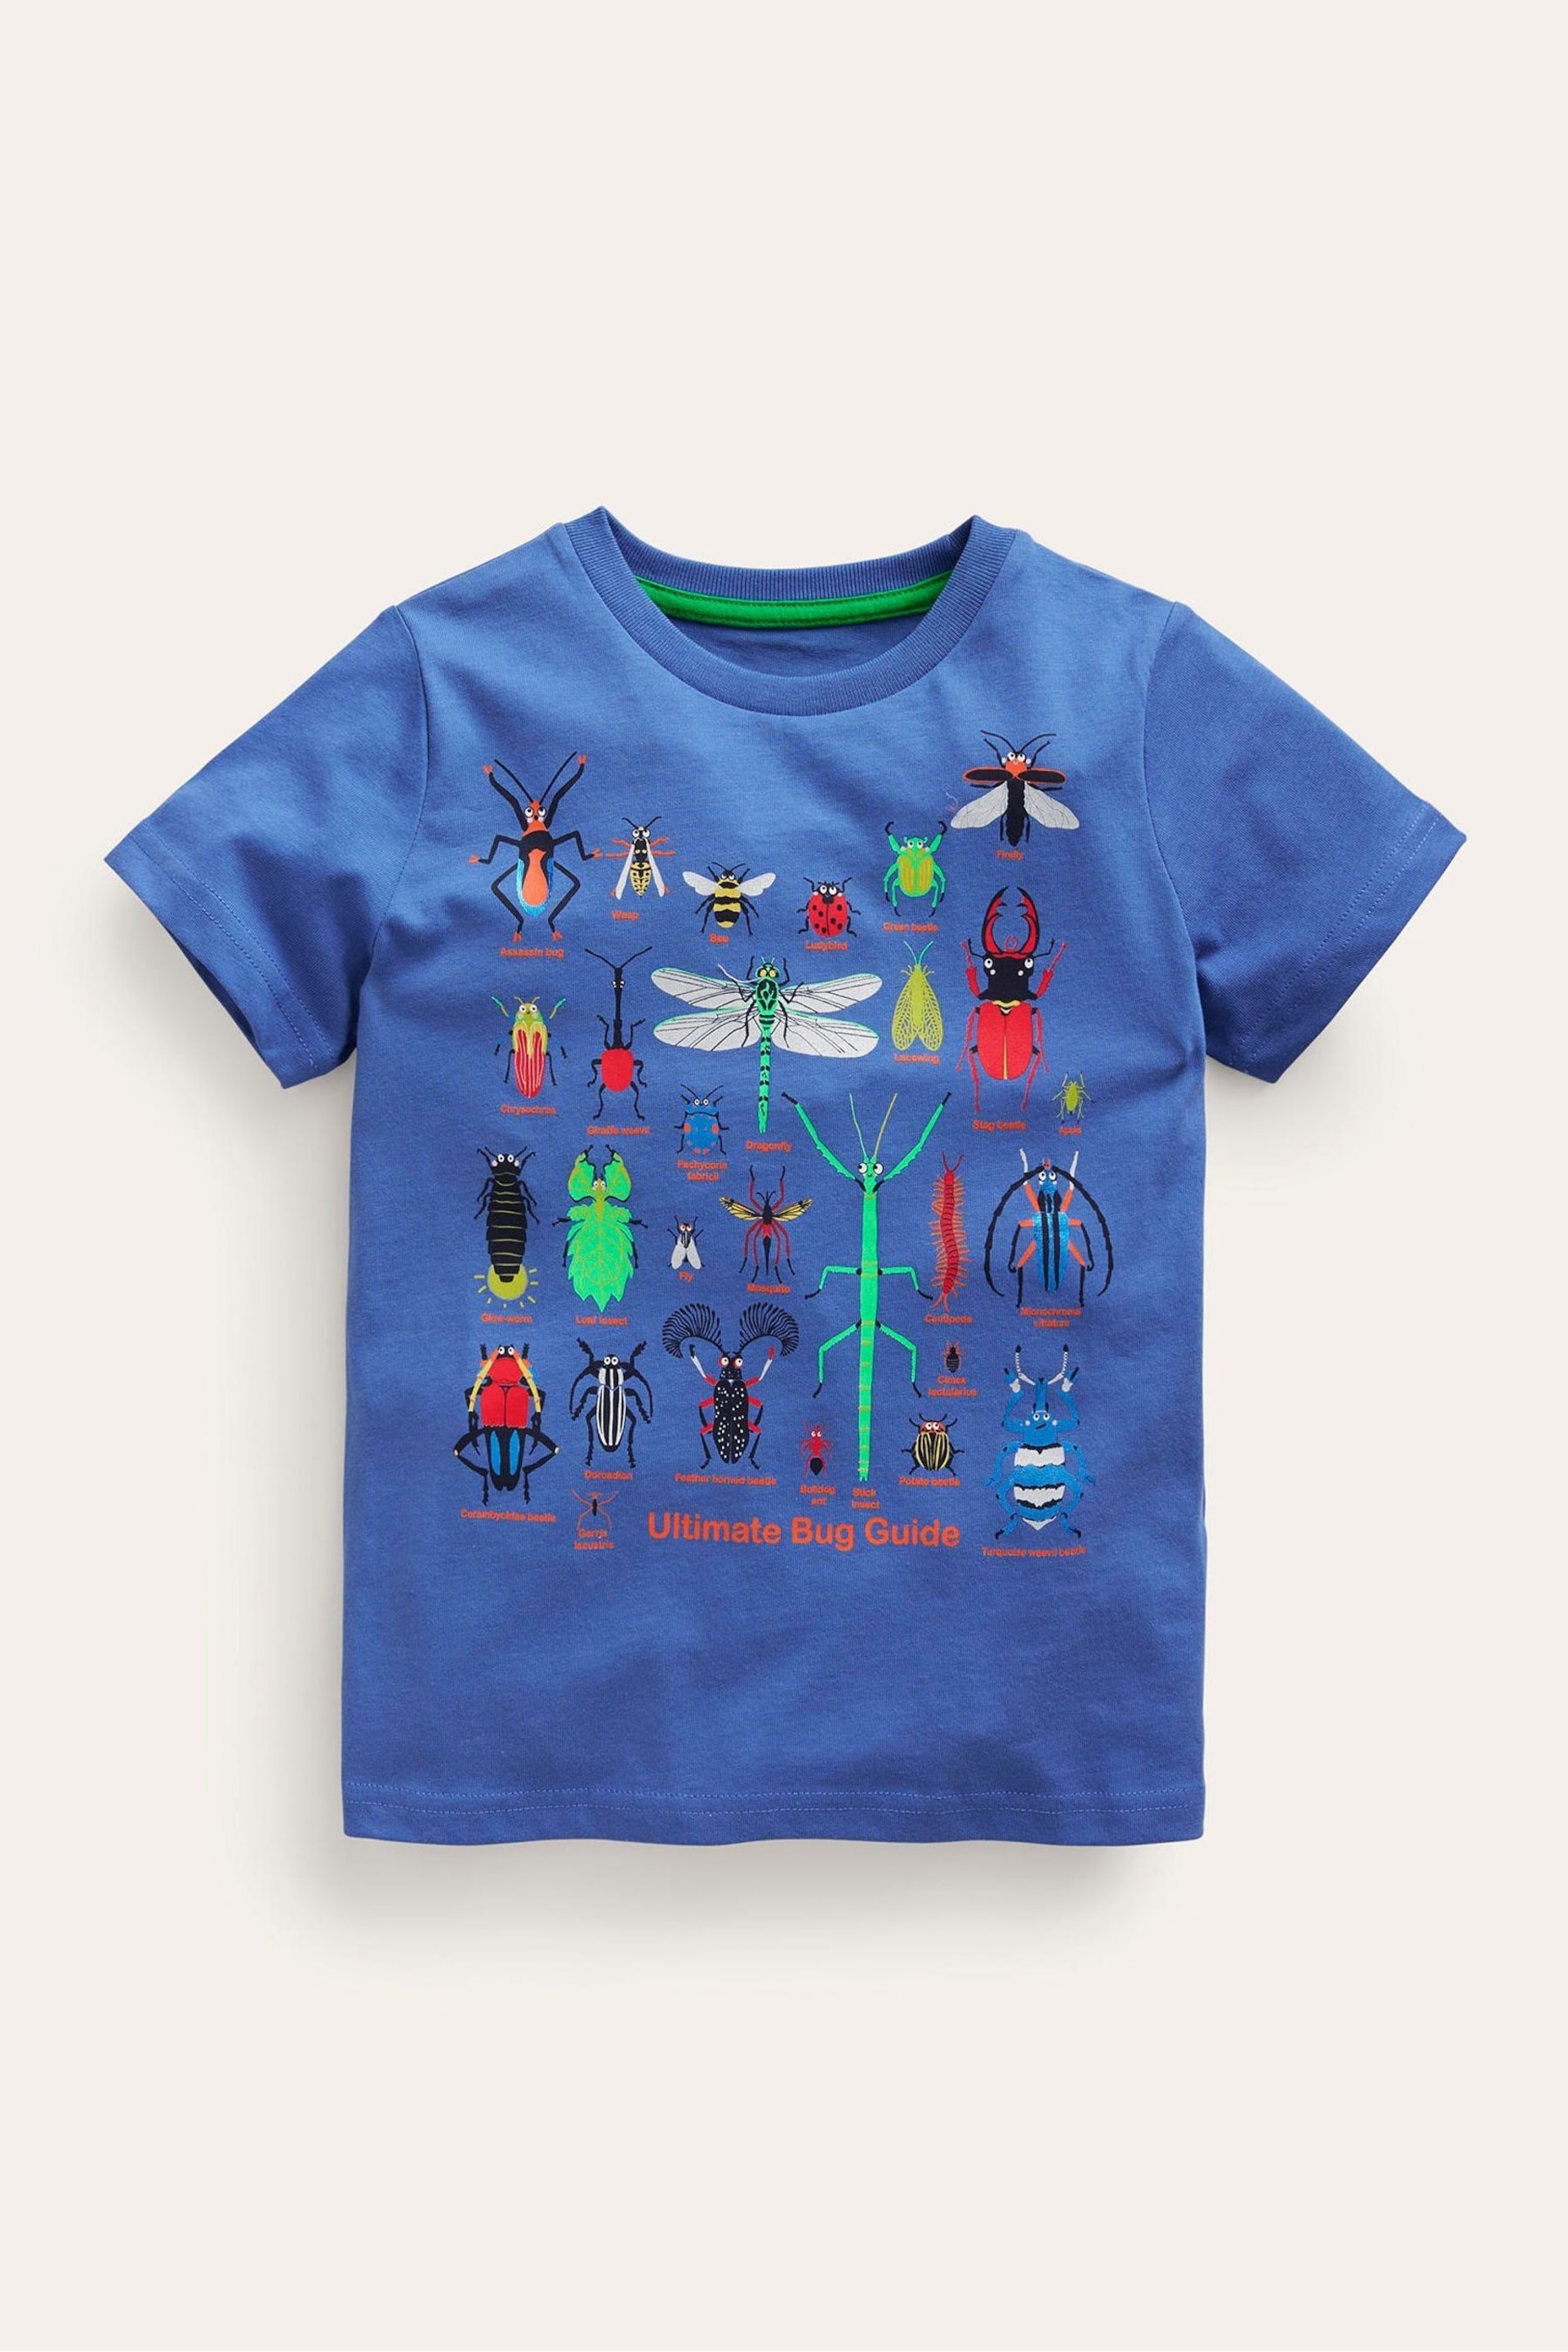 Boden Blue Printed Bugs T-Shirt - Image 1 of 3